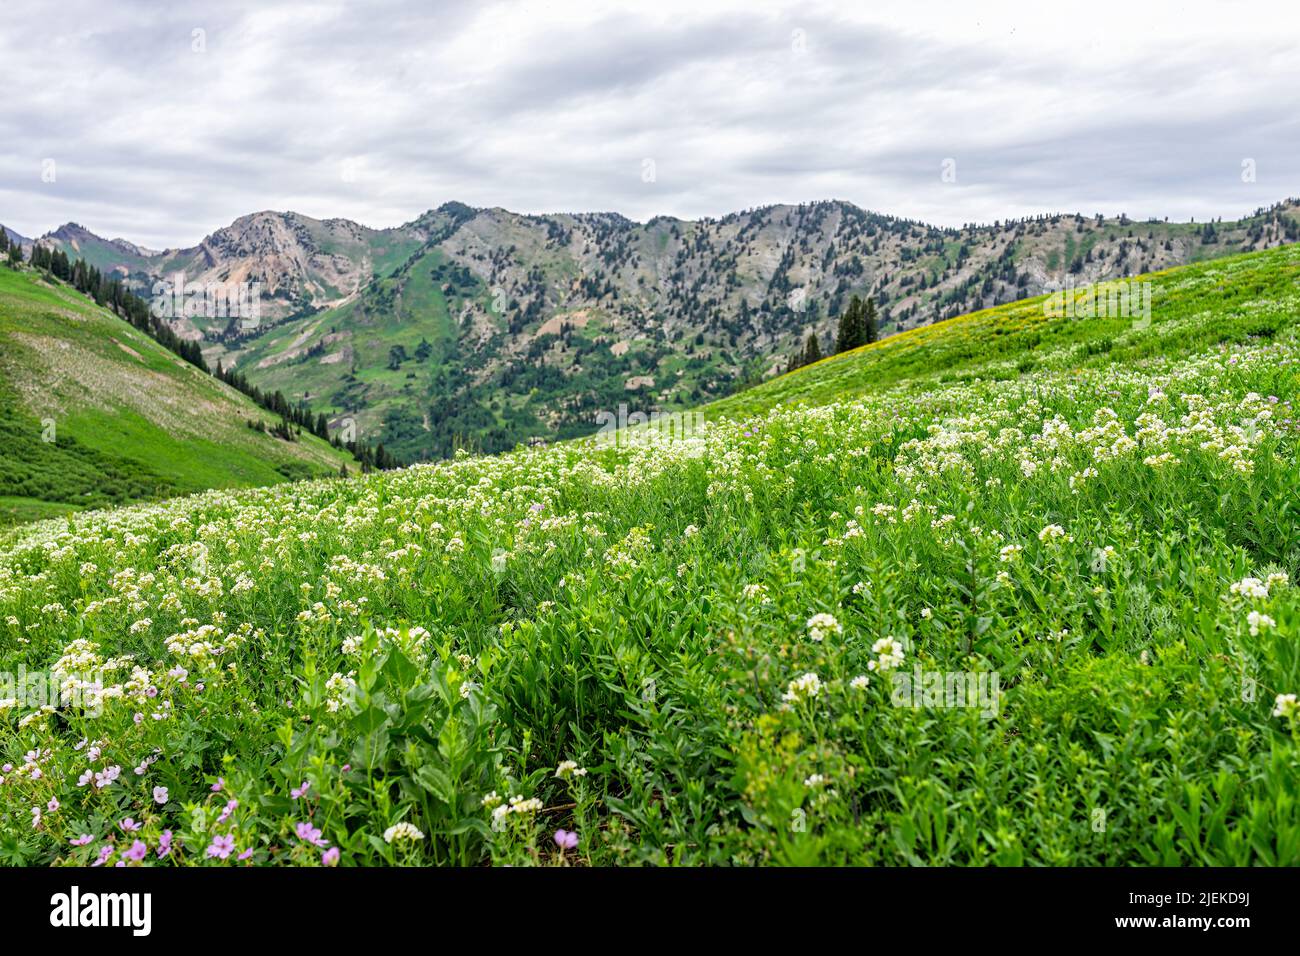 Albion Basin in Alta, Utah summer landscape view of meadows trail in wildflowers season in Wasatch mountains with many white Jacob's ladder flowers an Stock Photo